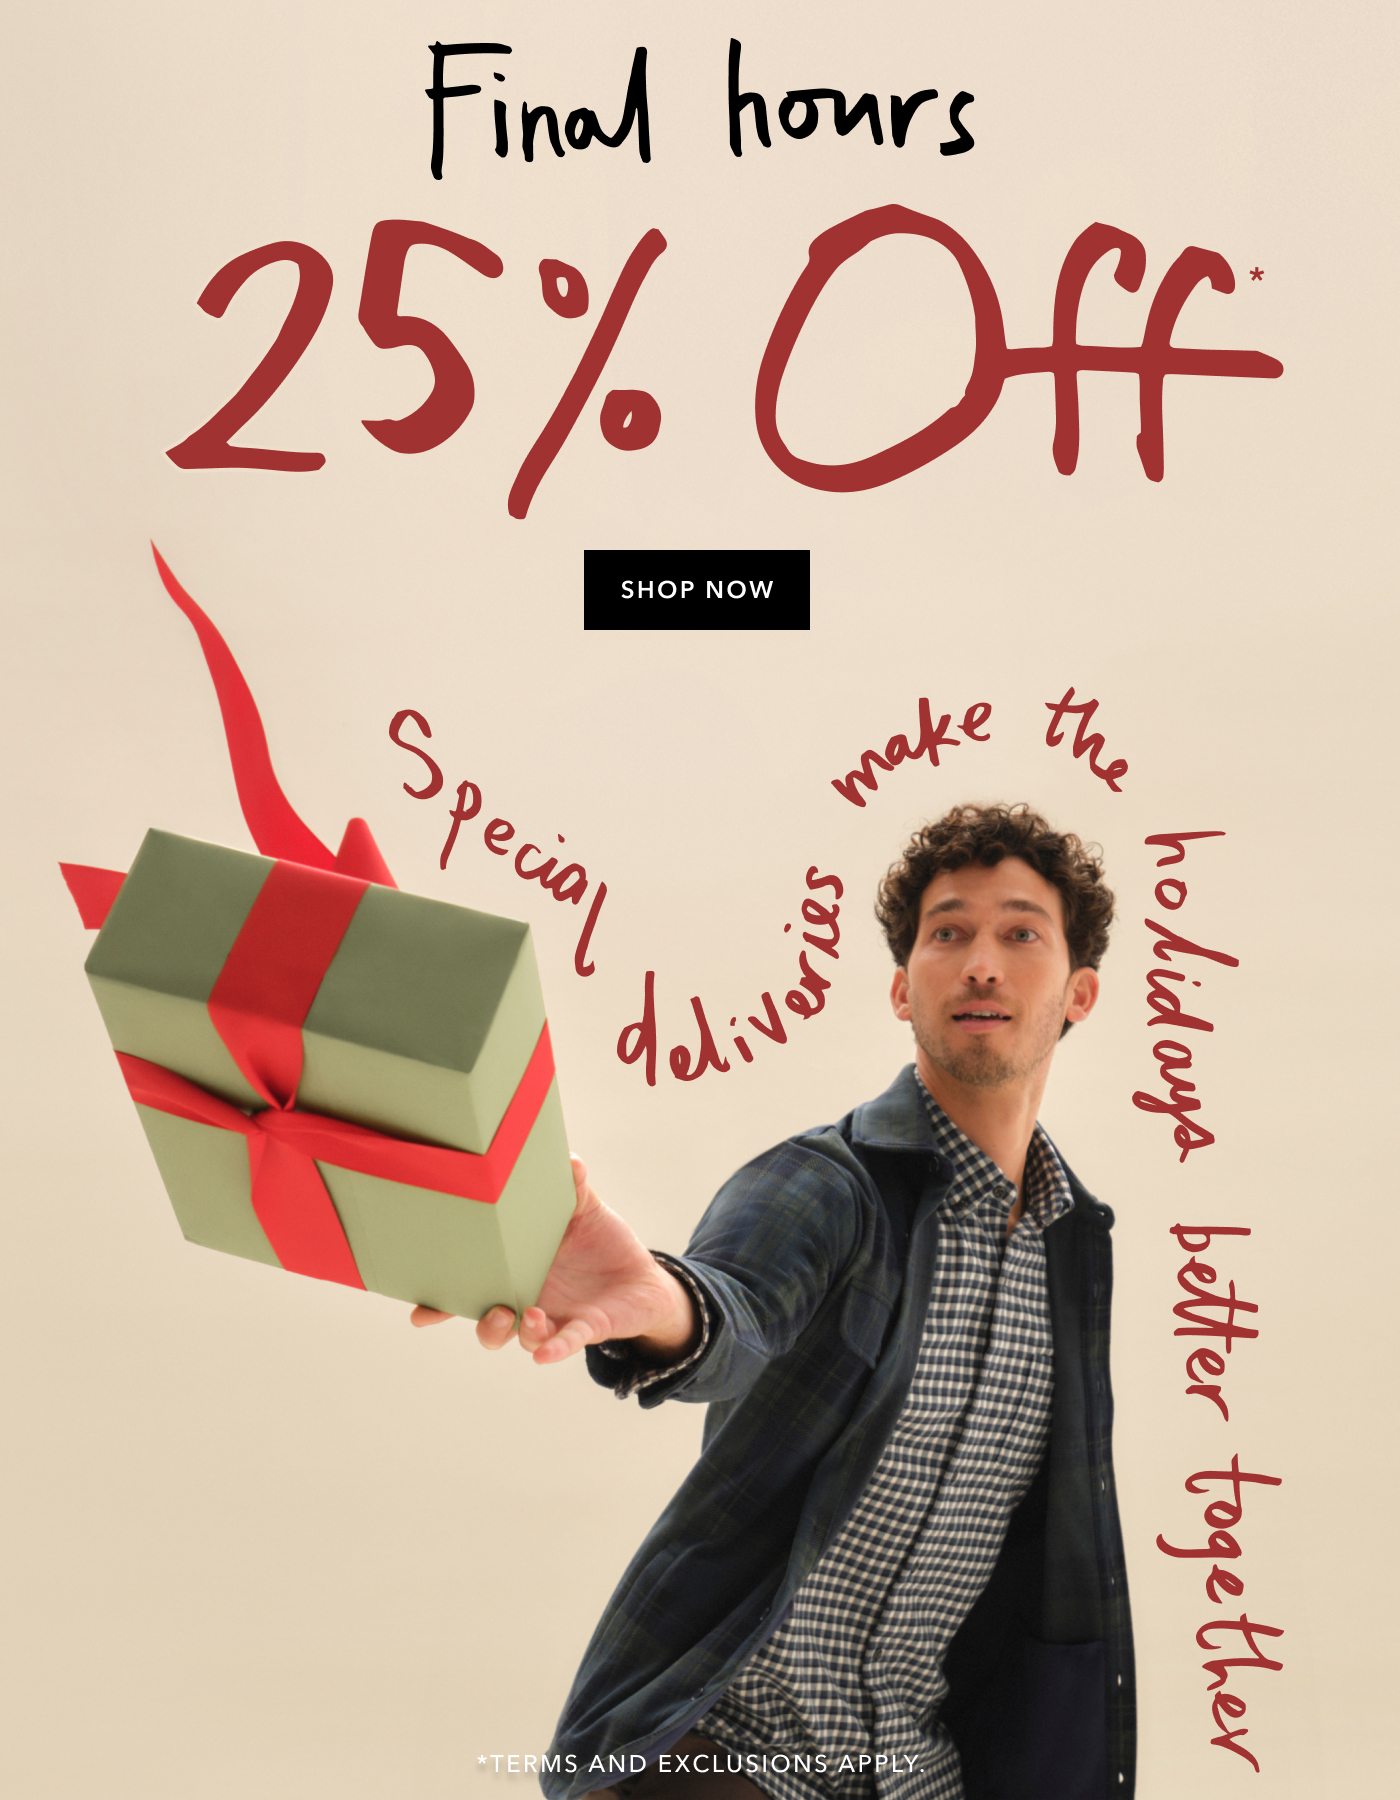 Final Hours- 25% off - shop now - terms and exclusions apply